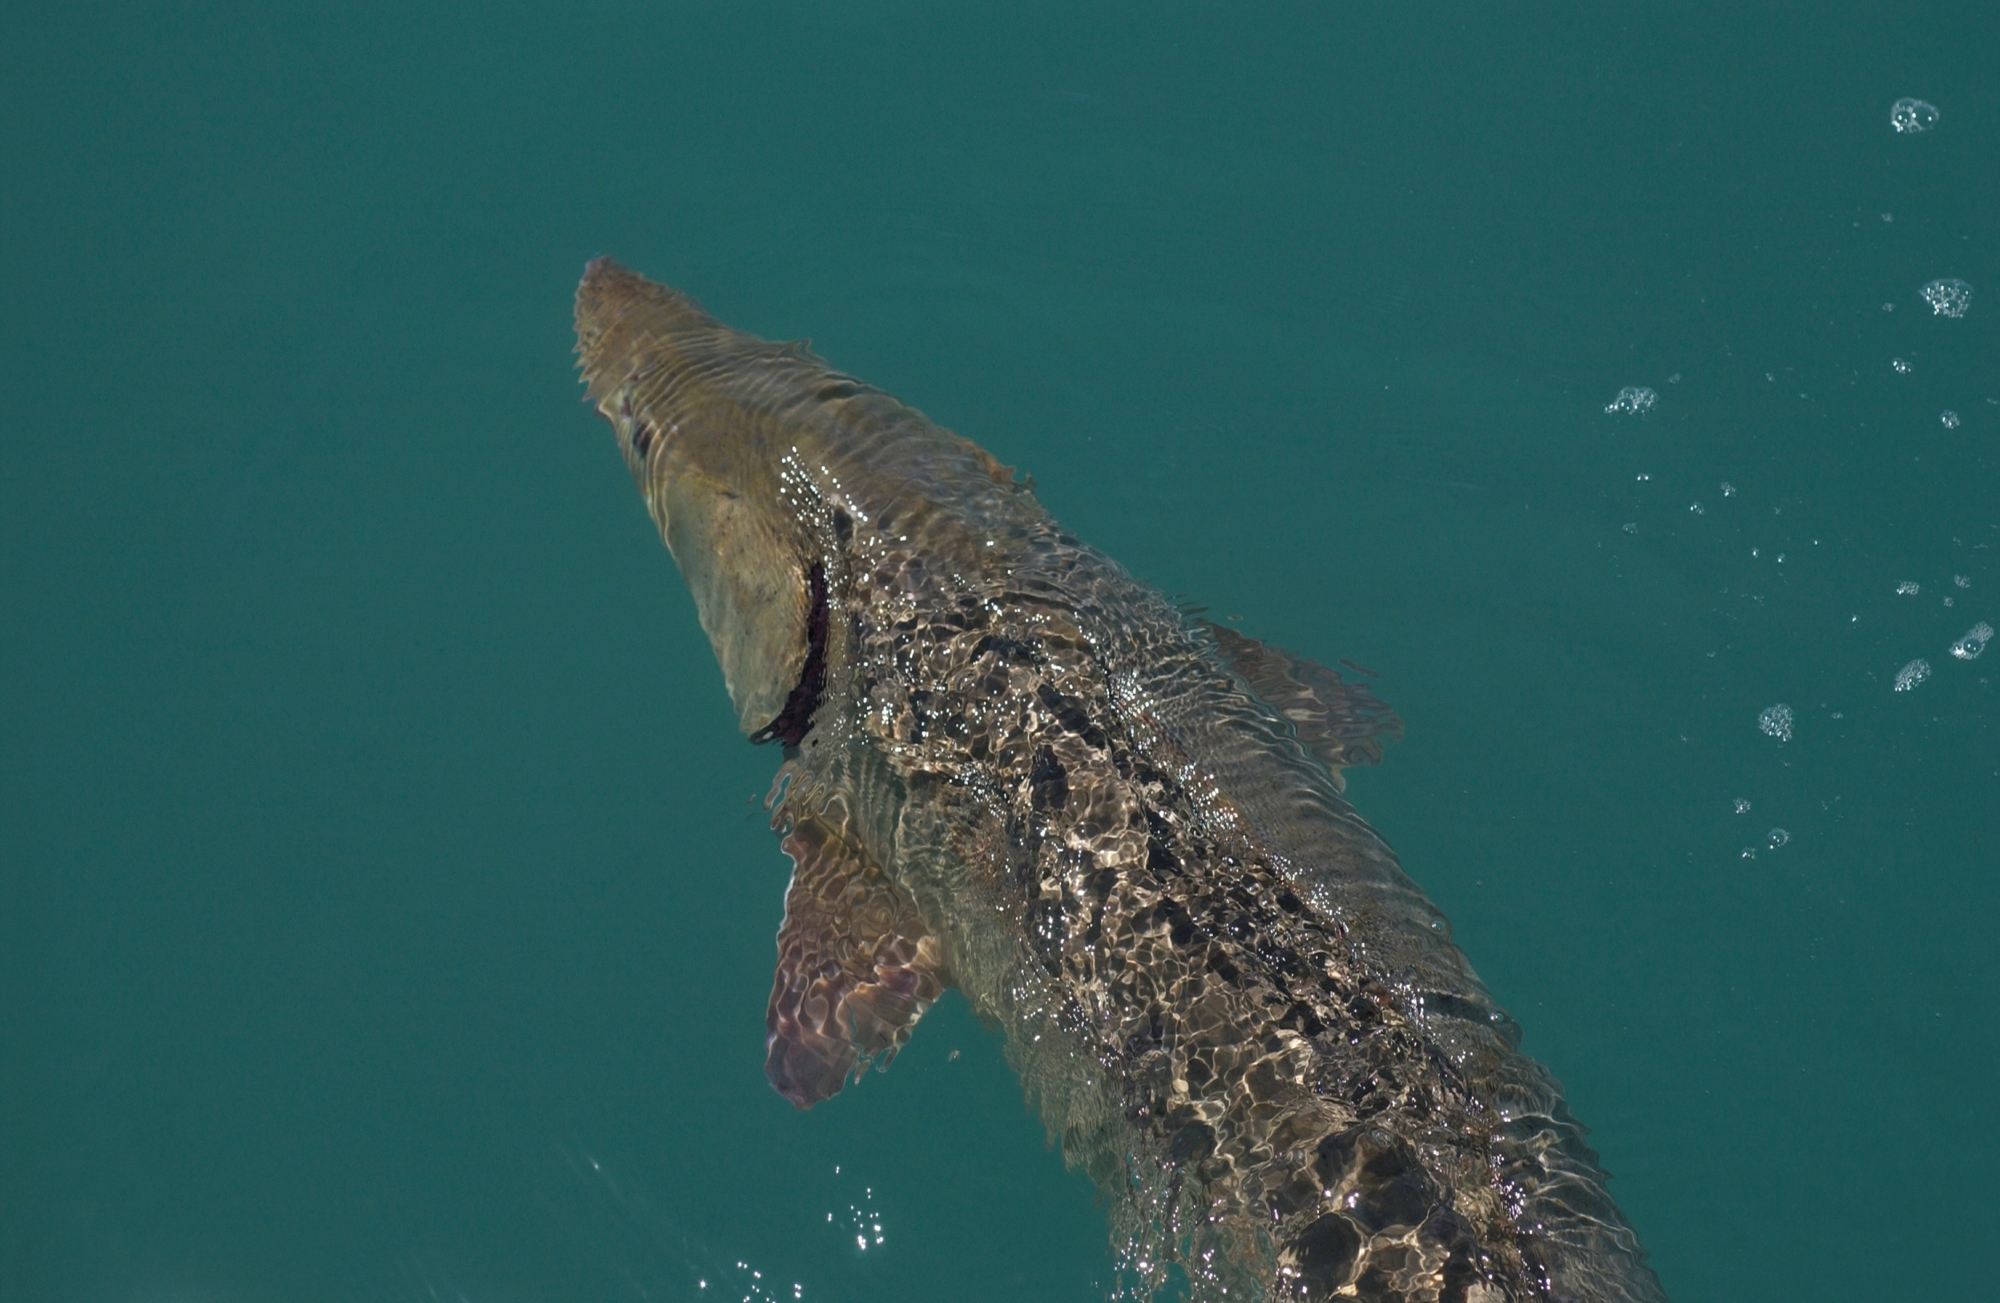 Lake sturgeon are one of Michigan's most important natural resources